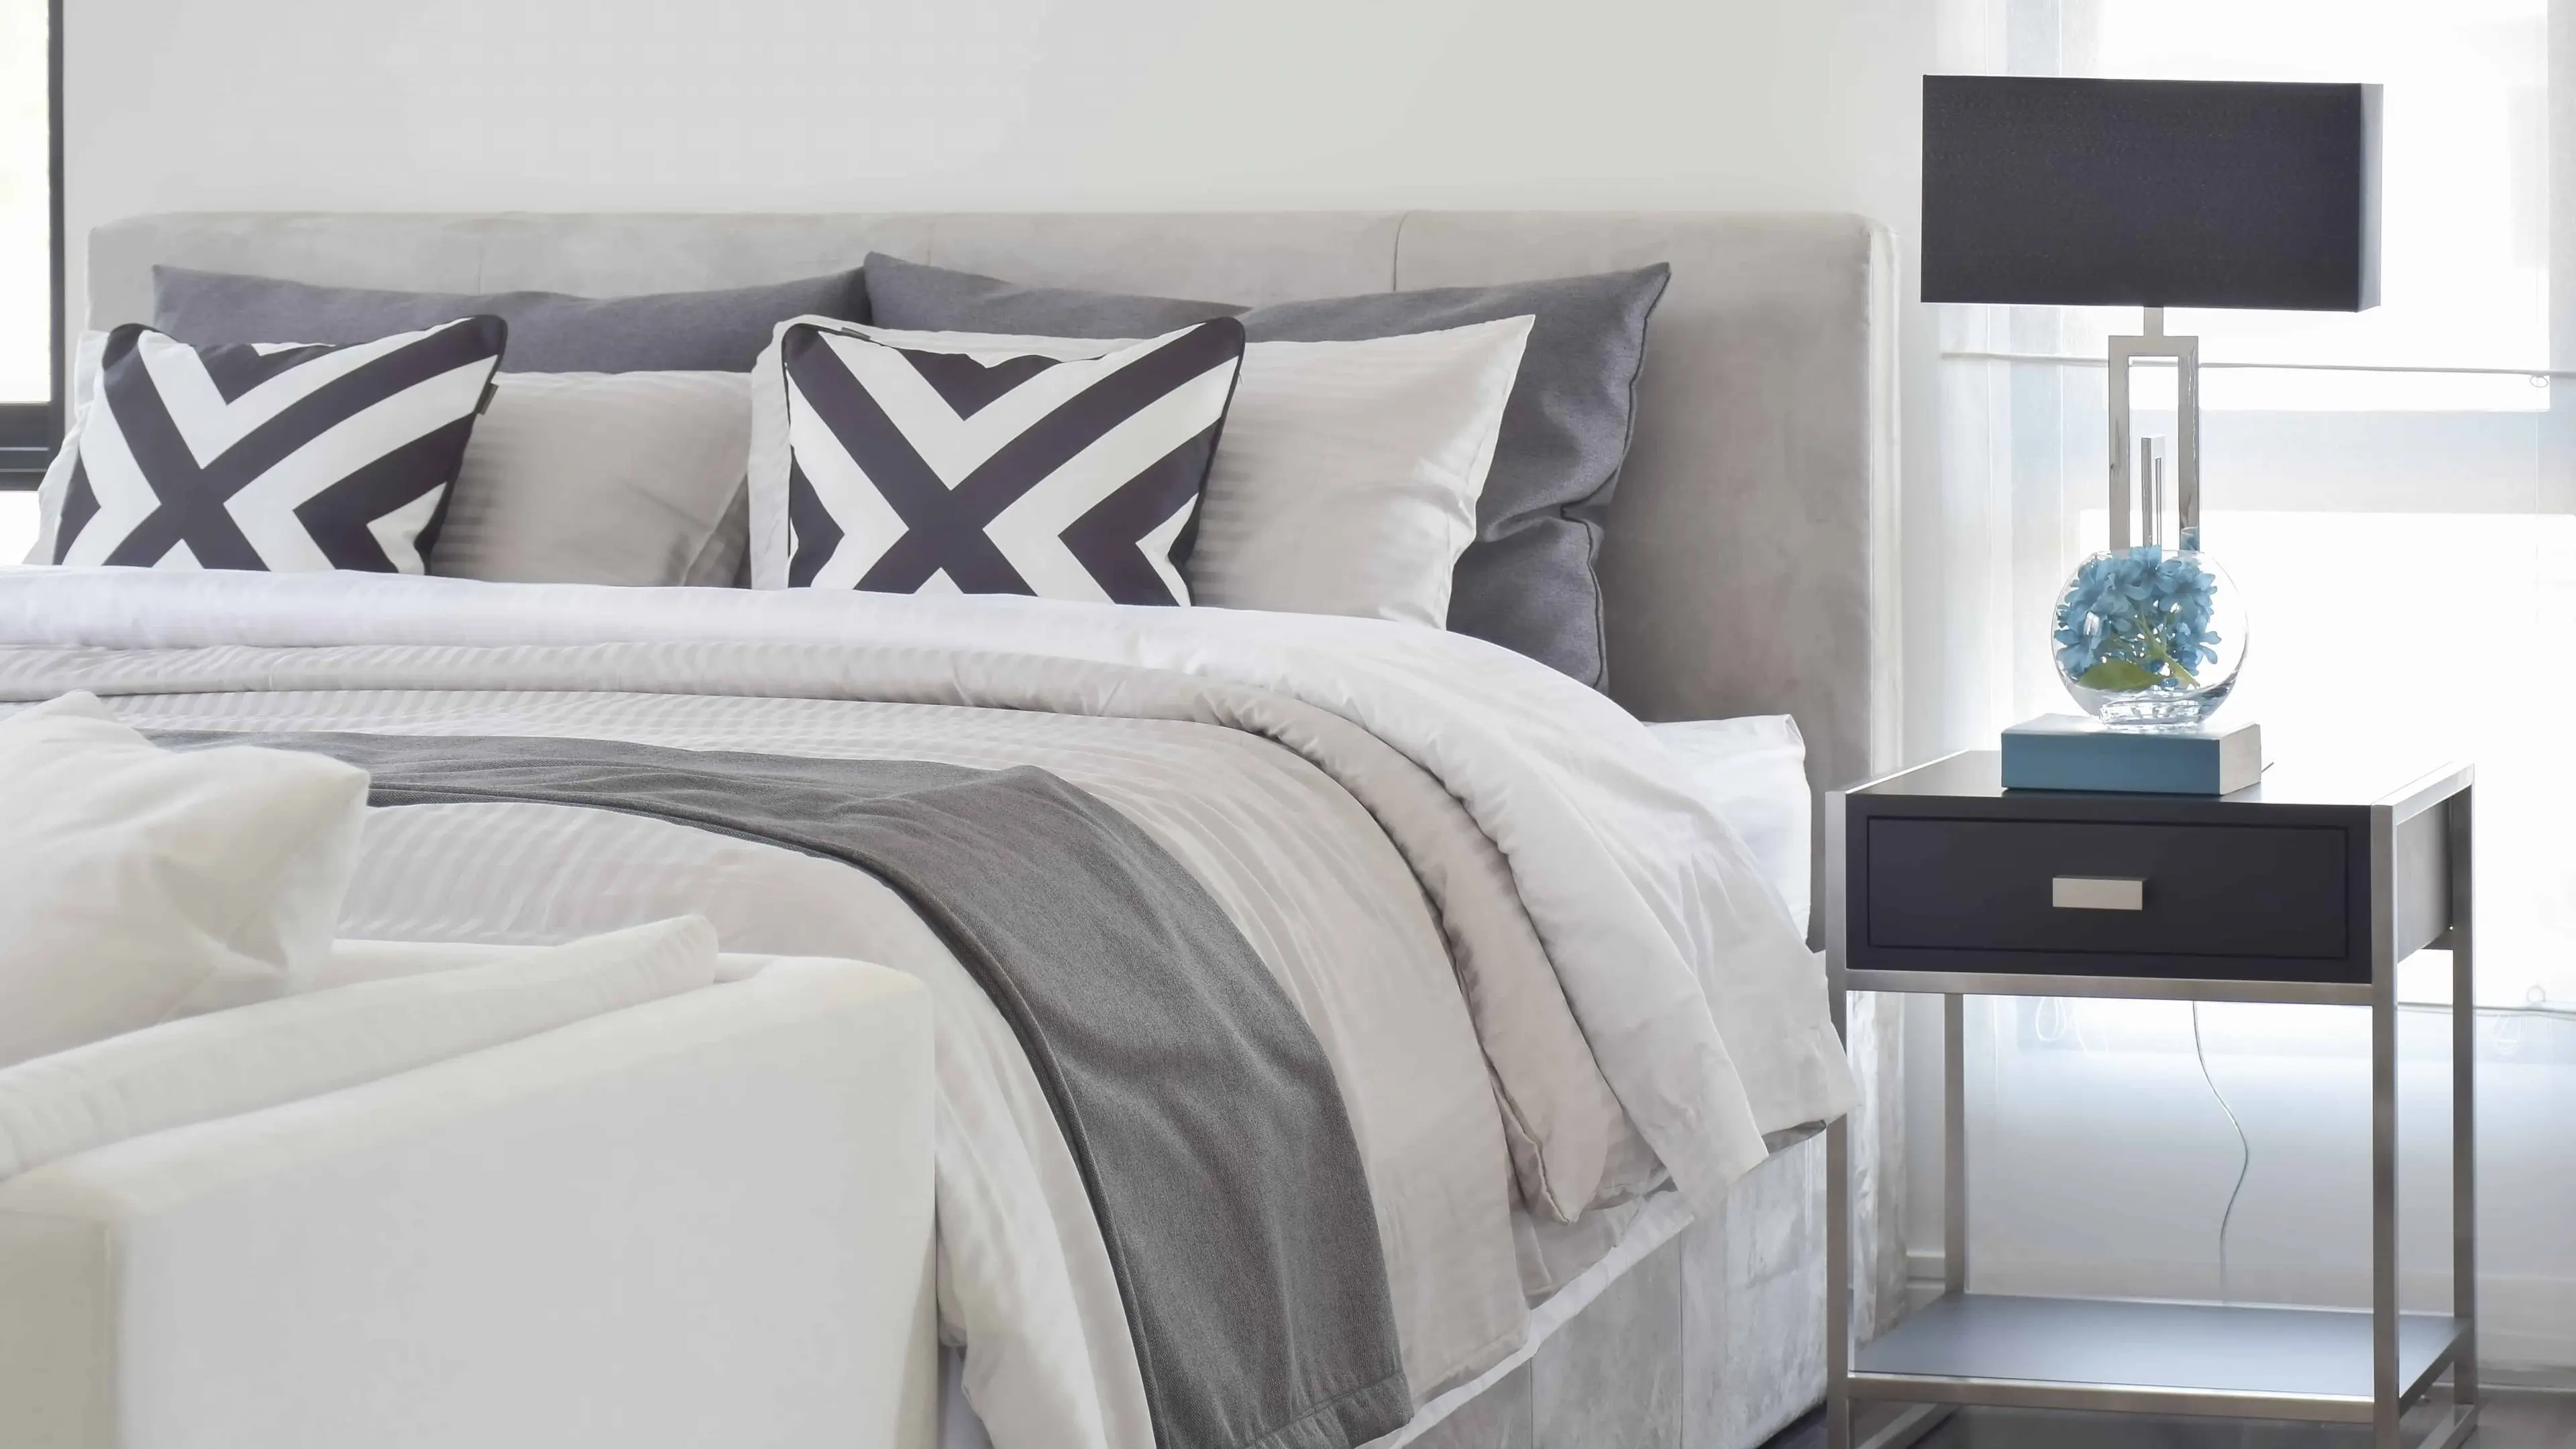 How To Pack Bedding & More - Modern Gray tone bedding and bedside table and lamp in black - United Van Lines